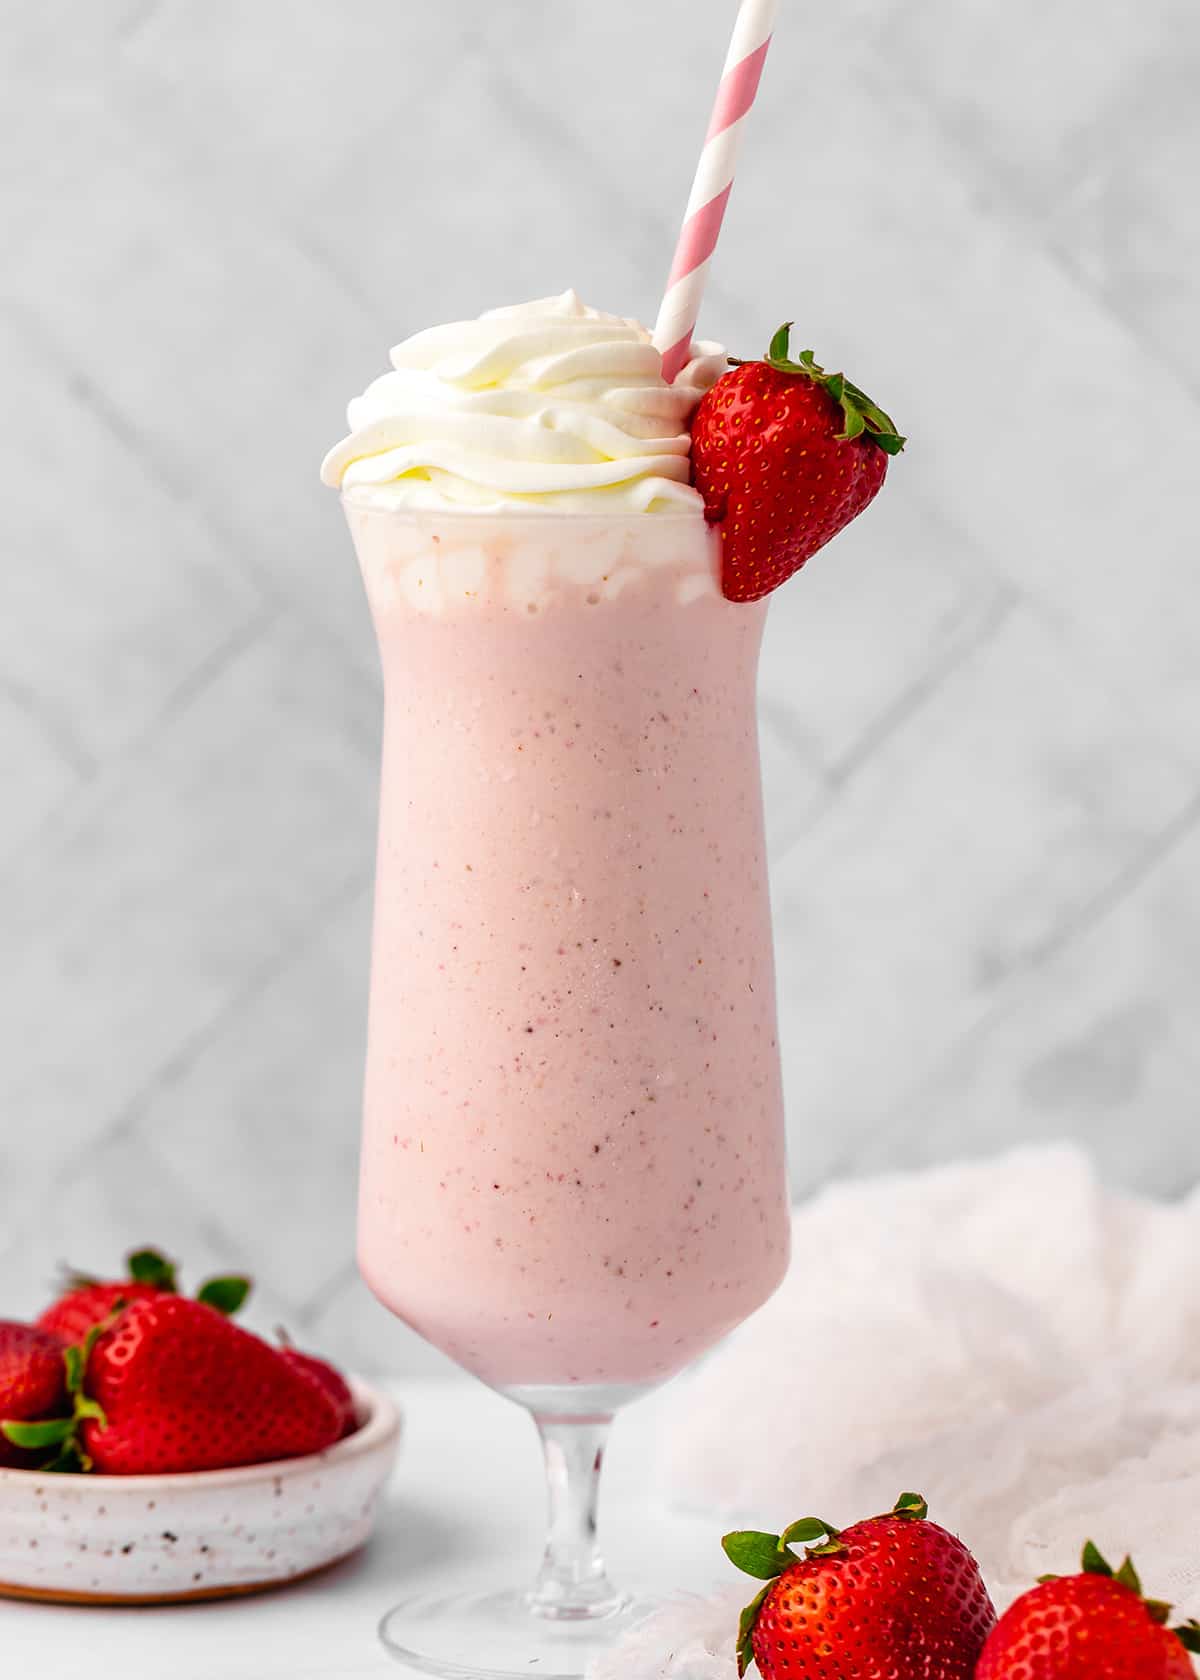 Strawberry Milkshake in a glass with a straw, whipped cream and a strawberry